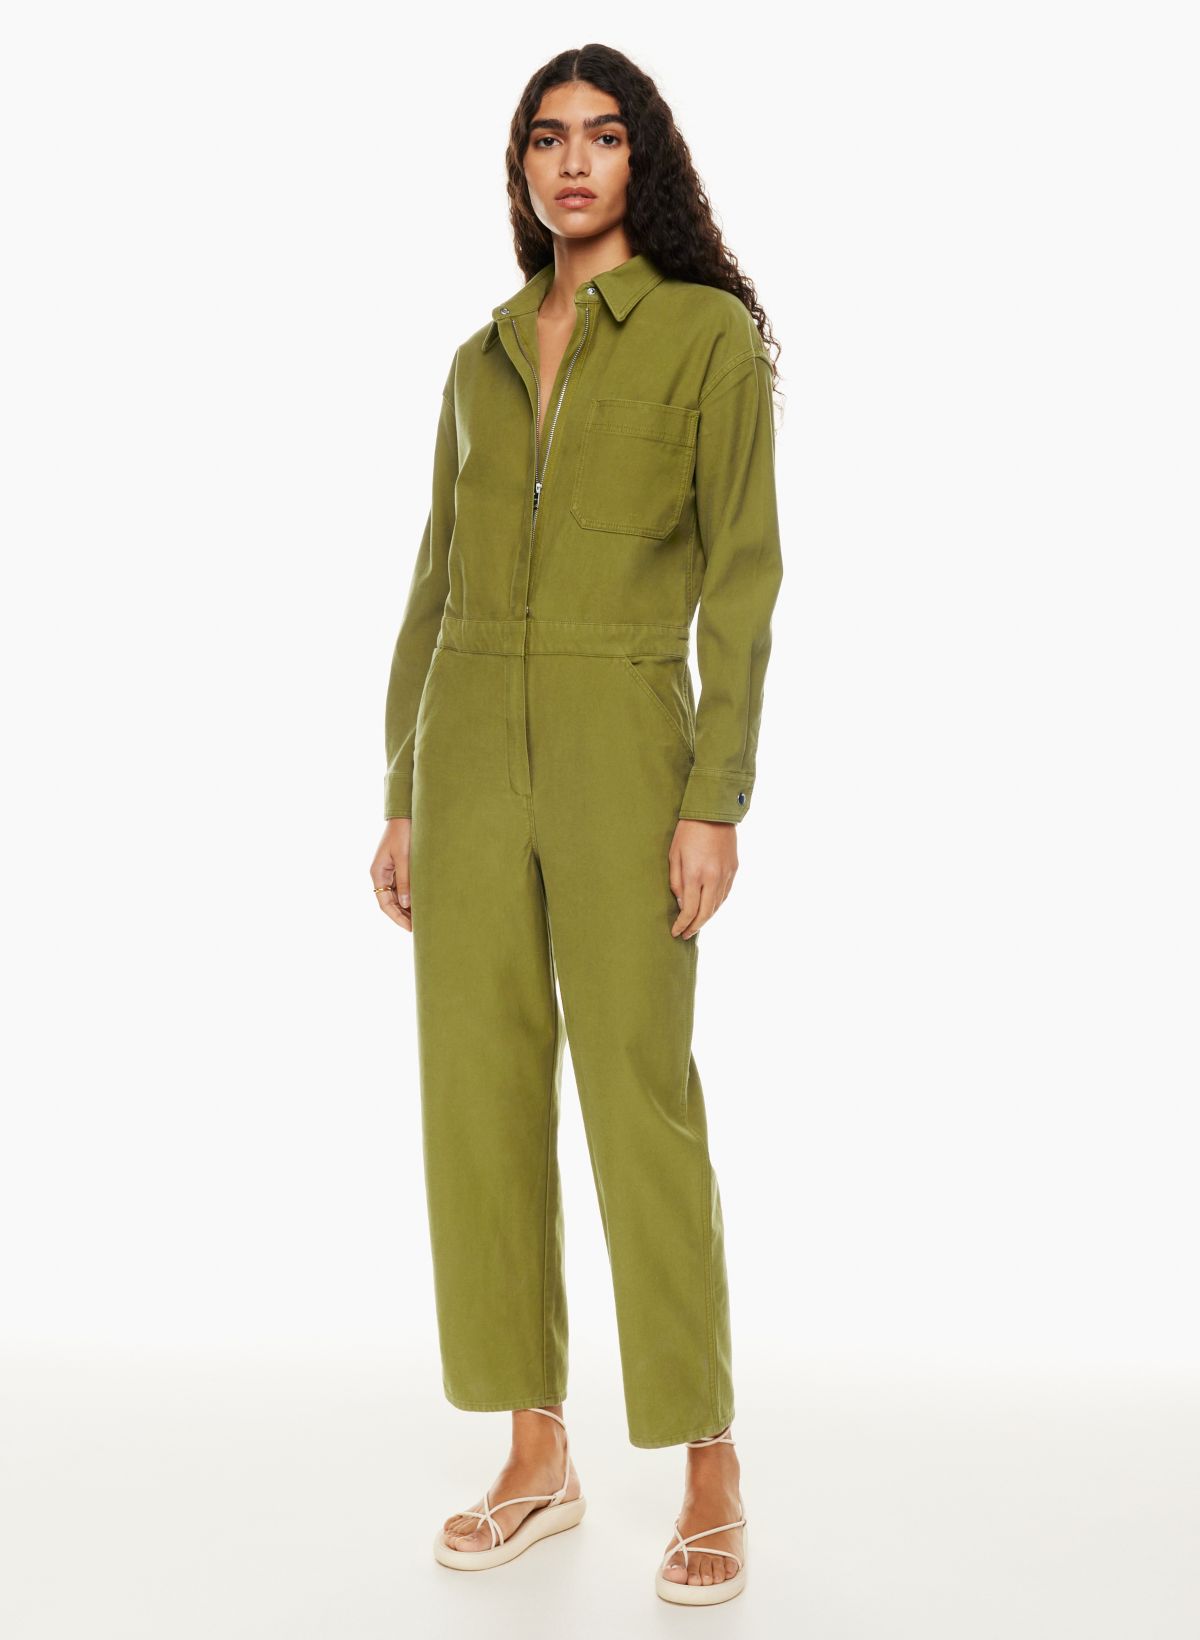 Wilfred Free KAL JUMPSUIT